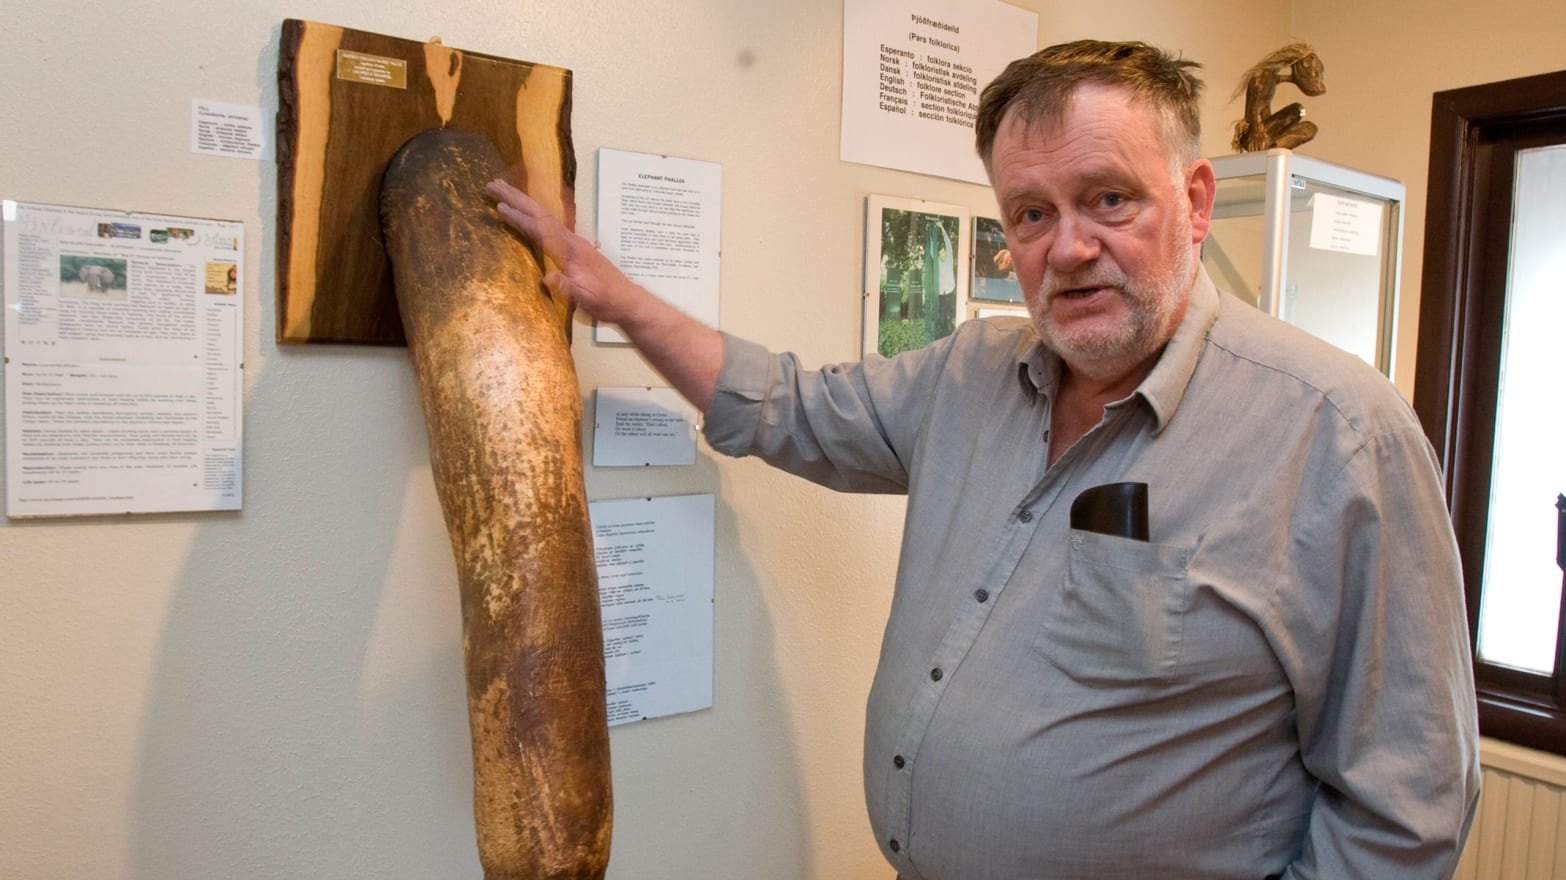 carolyn saville recommends biggest dick world record pic